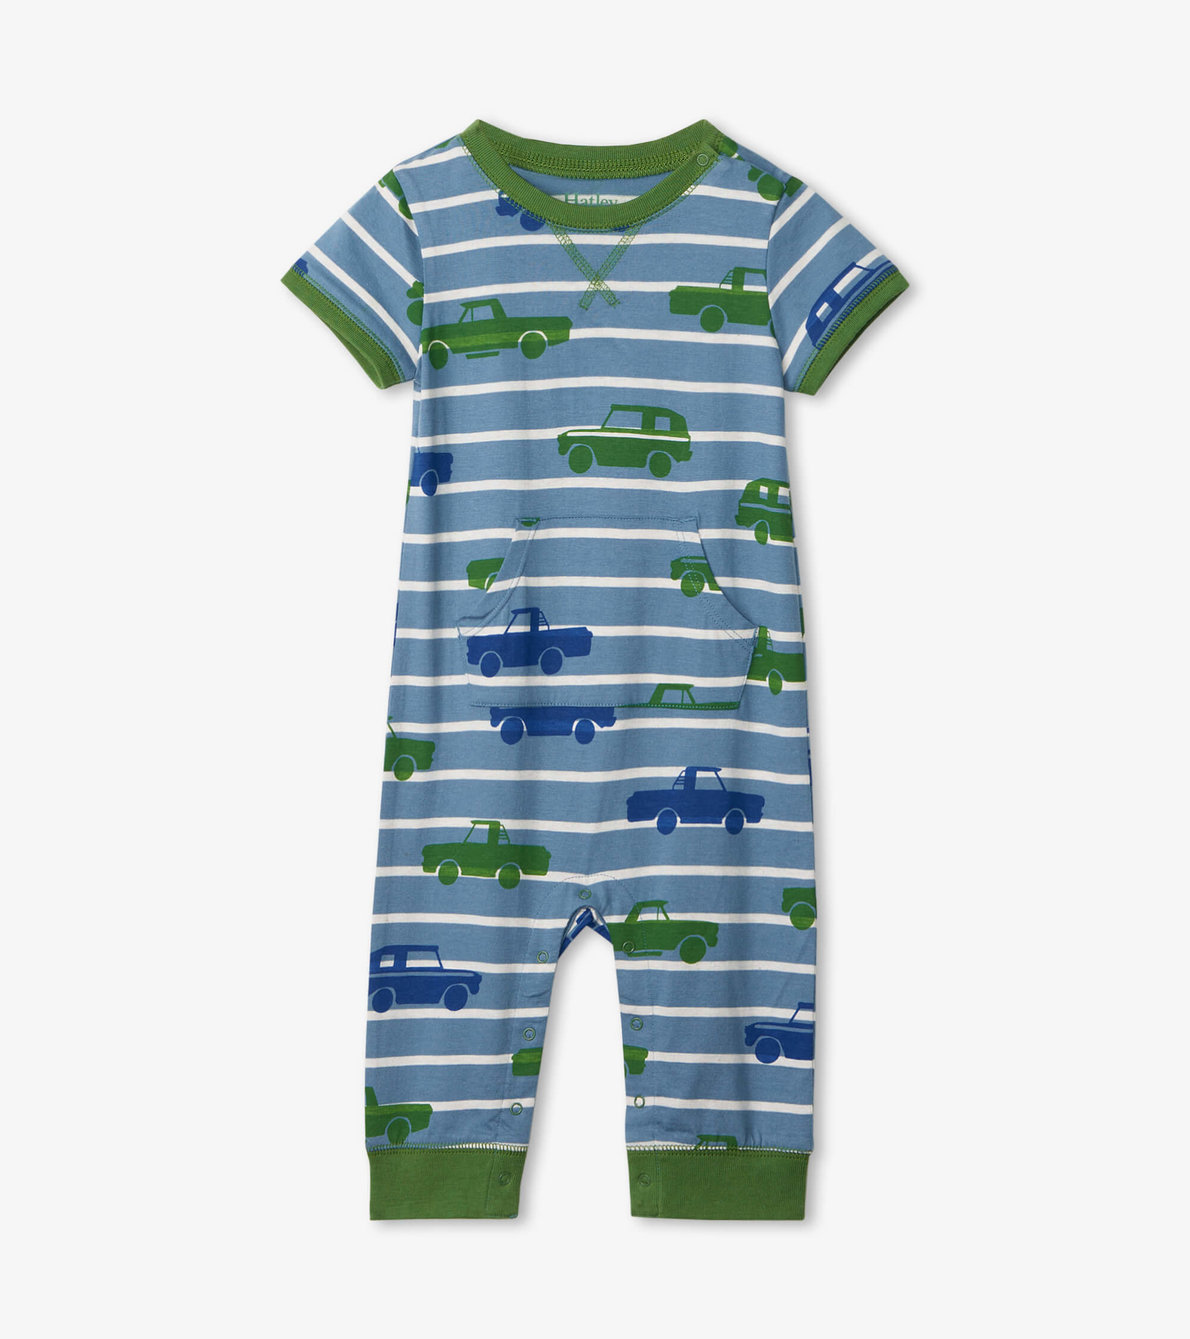 View larger image of Vintage Cars Baby Romper